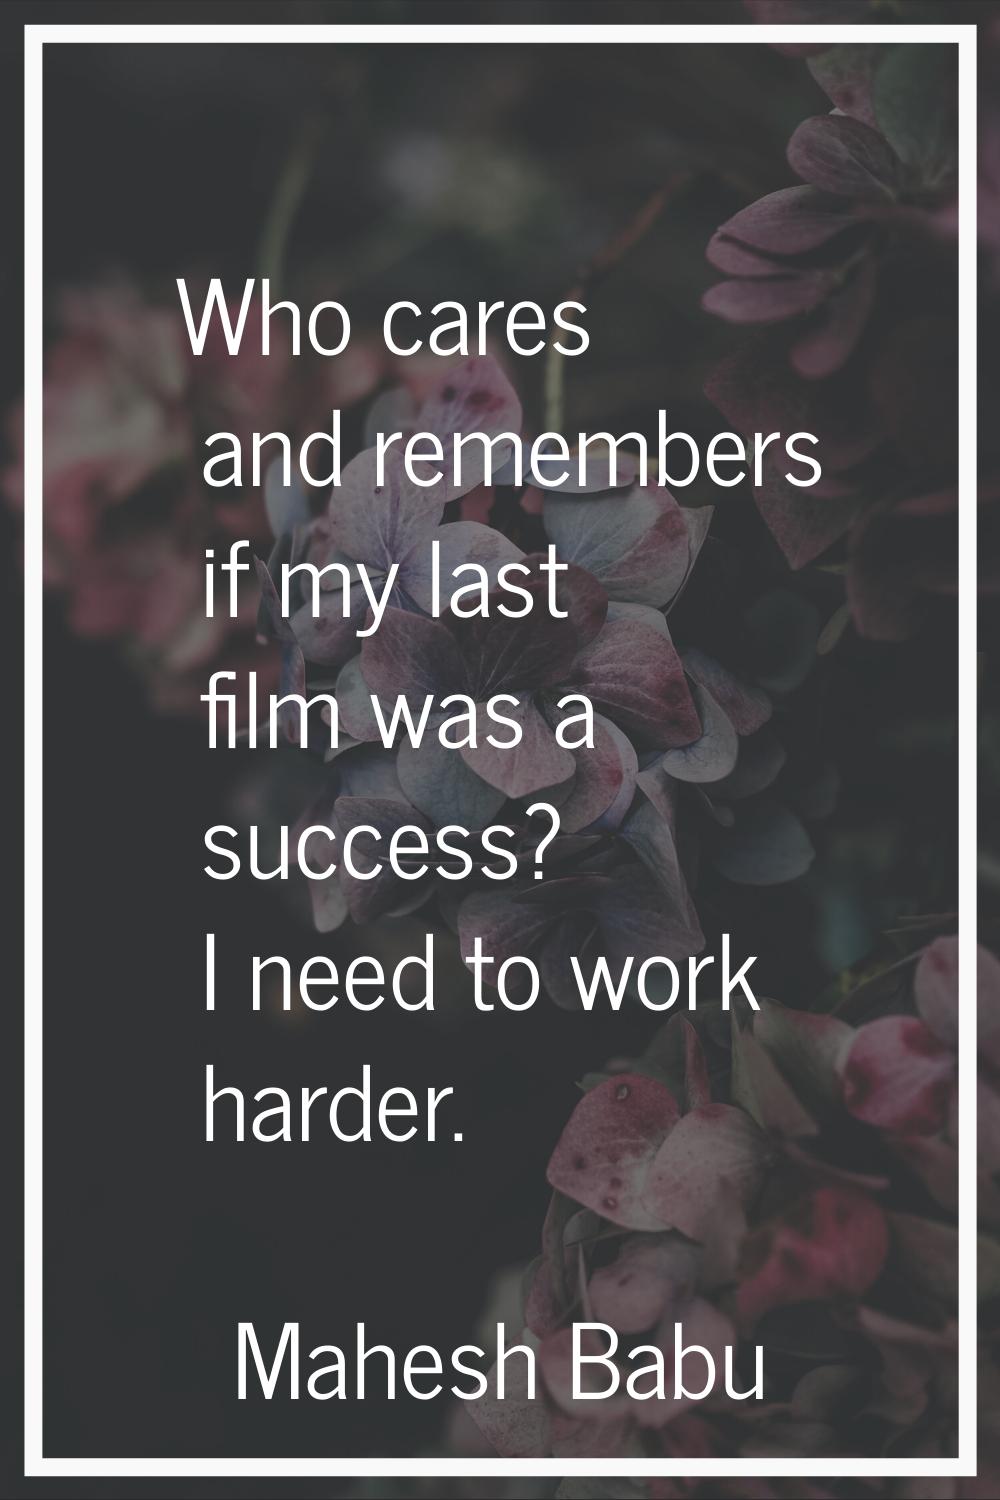 Who cares and remembers if my last film was a success? I need to work harder.